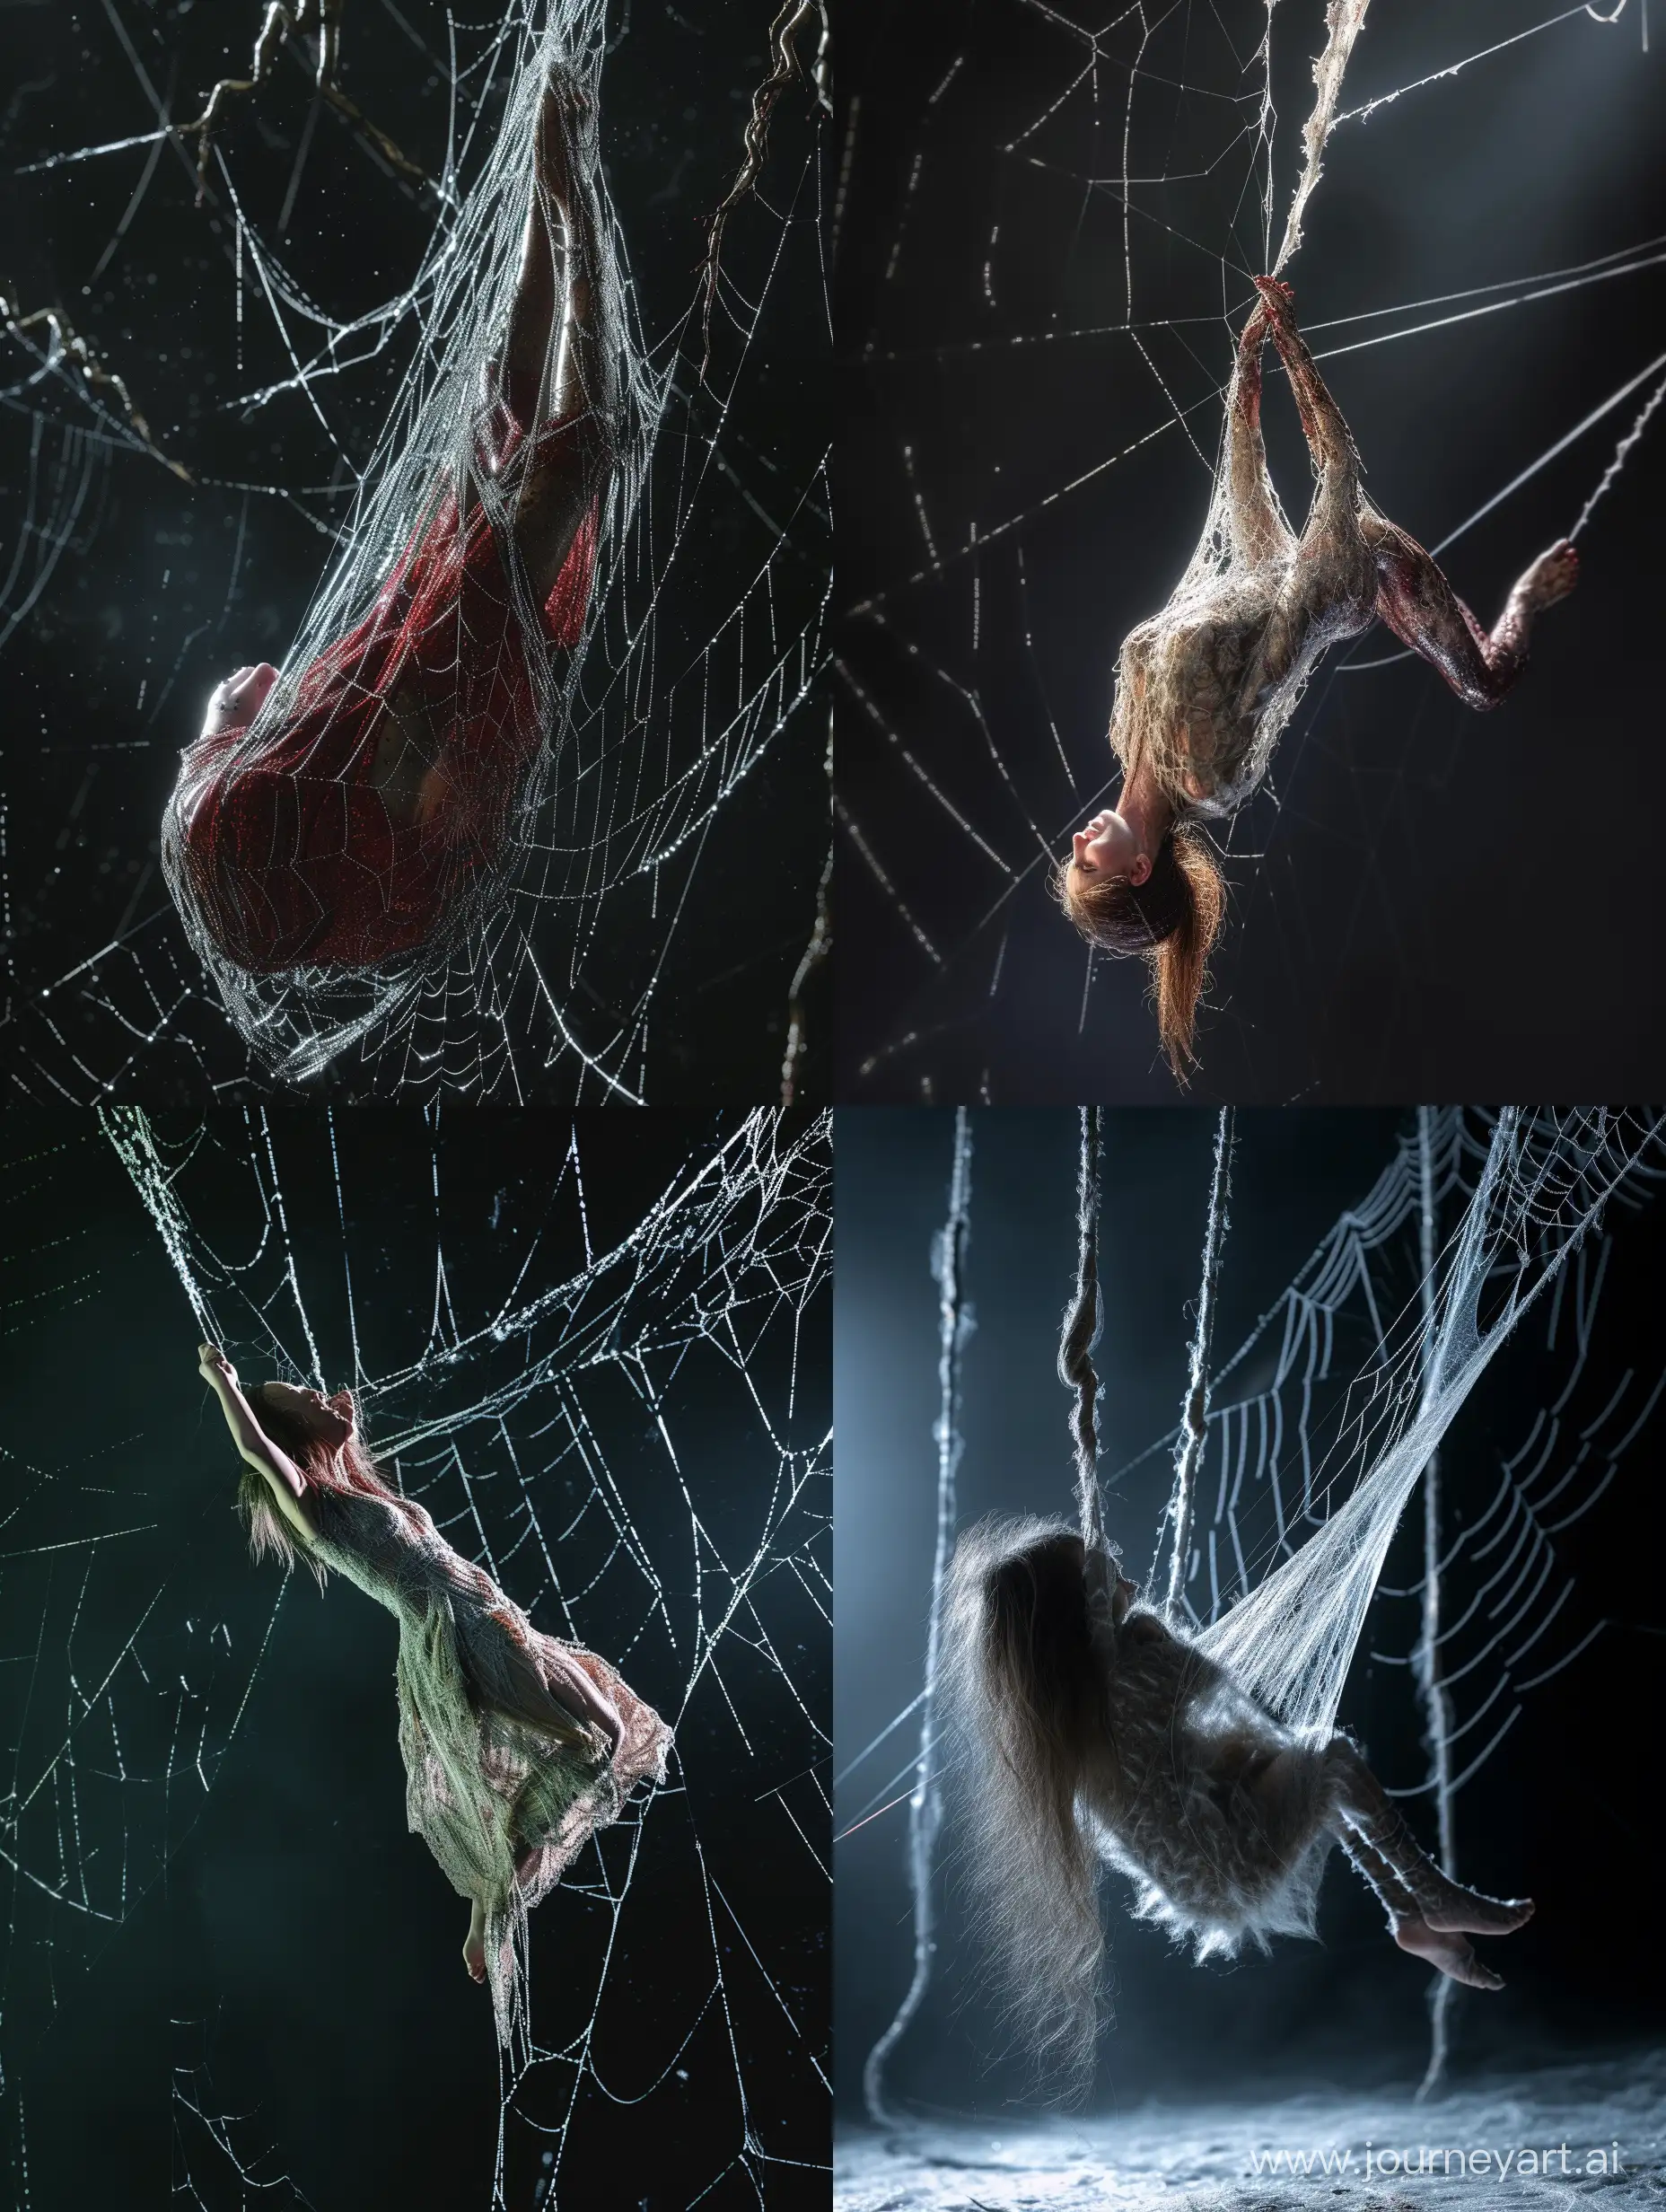 Enchanted-Fairy-Trapped-in-Spider-Web-Captivating-Horror-Fantasy-Art